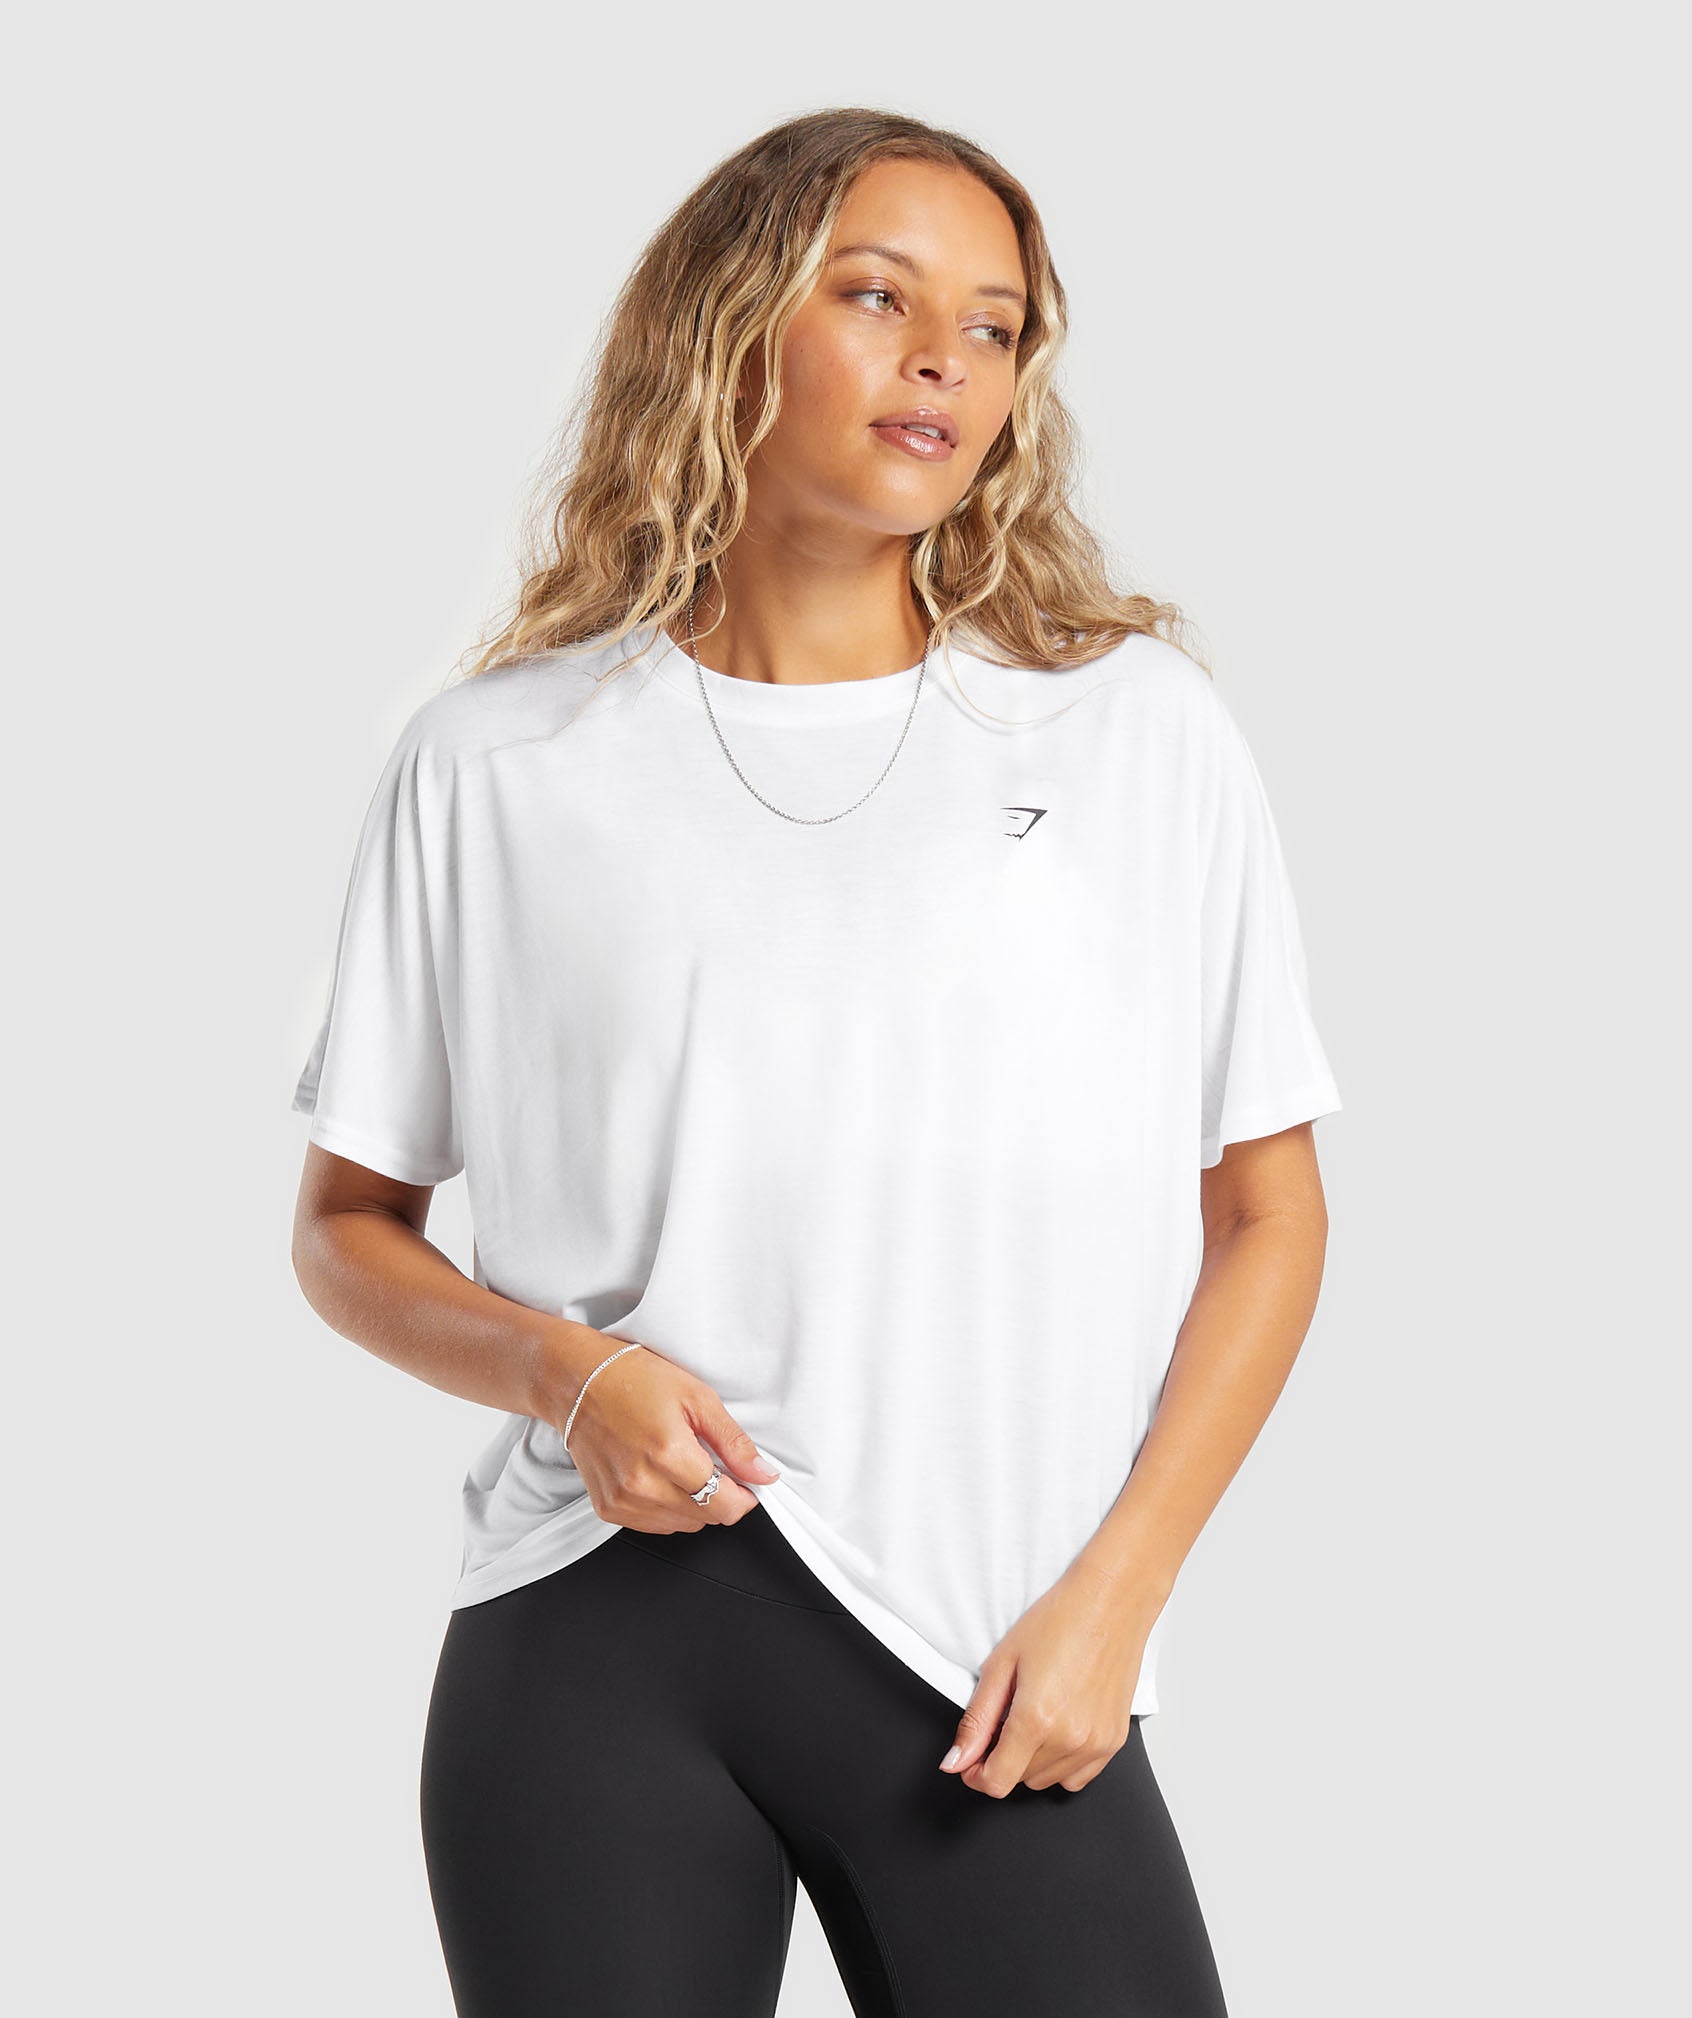 Super Soft T-Shirt in White - view 1